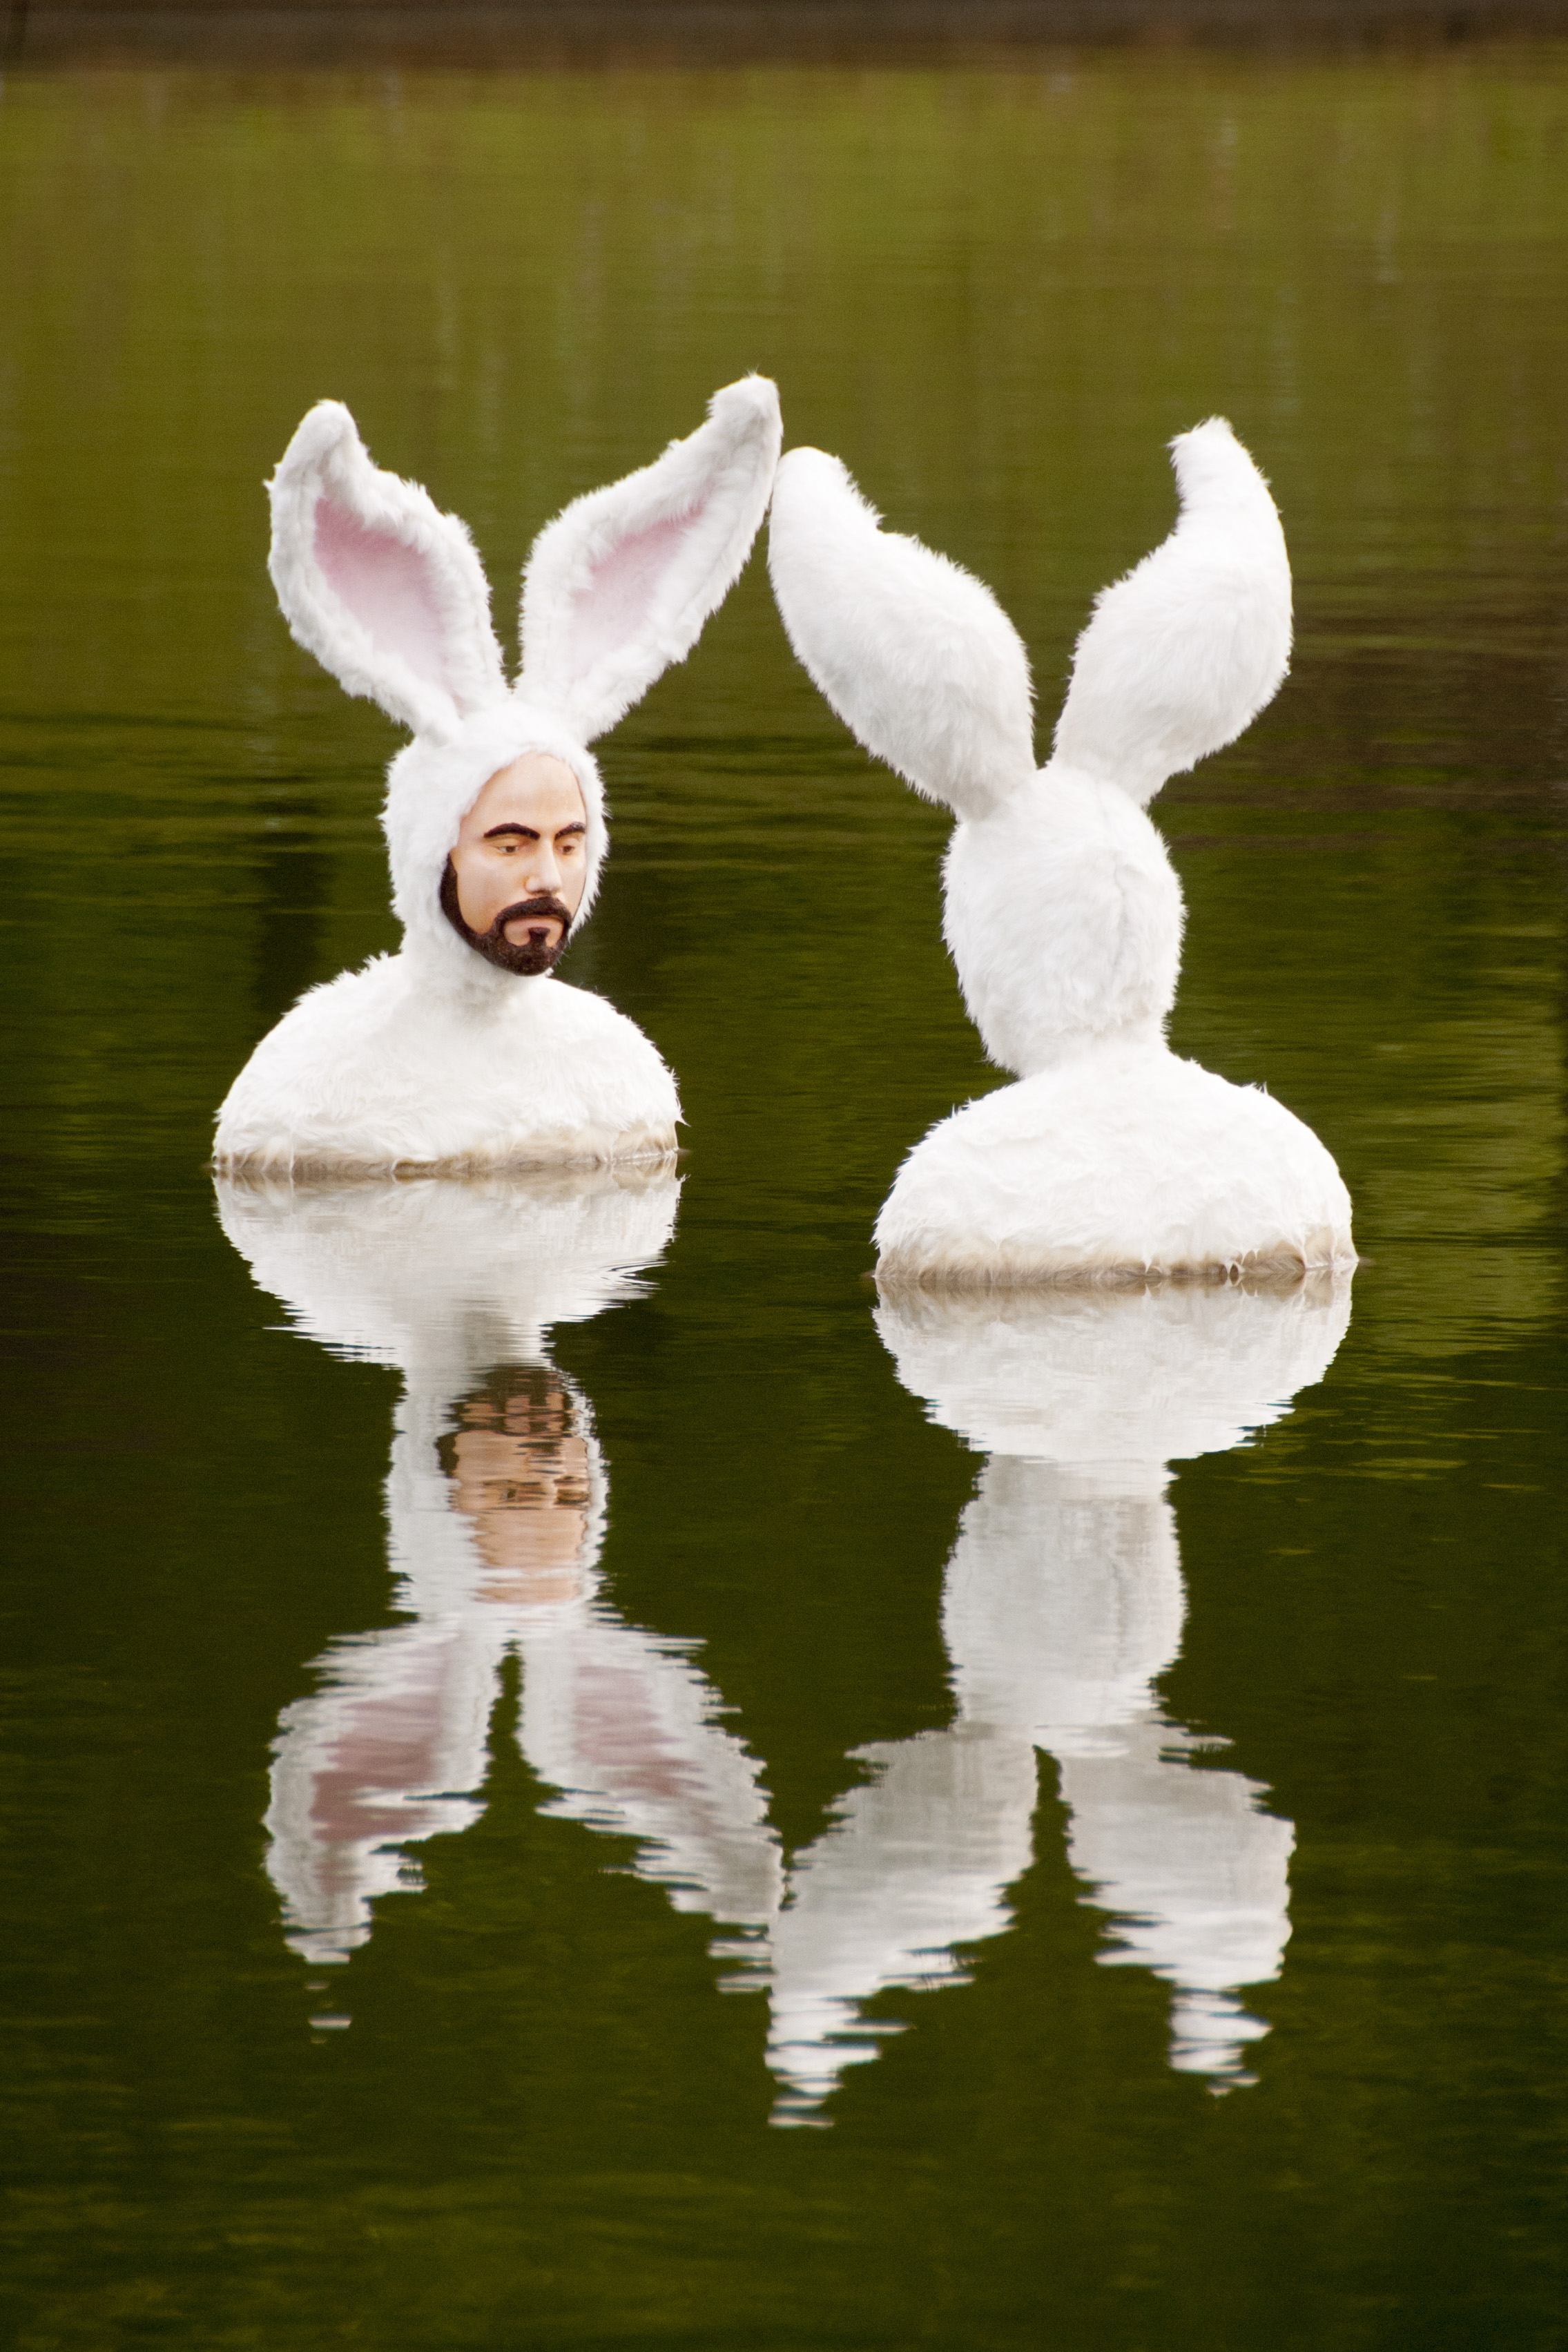 A water feature sculpture of two men in bunny suits